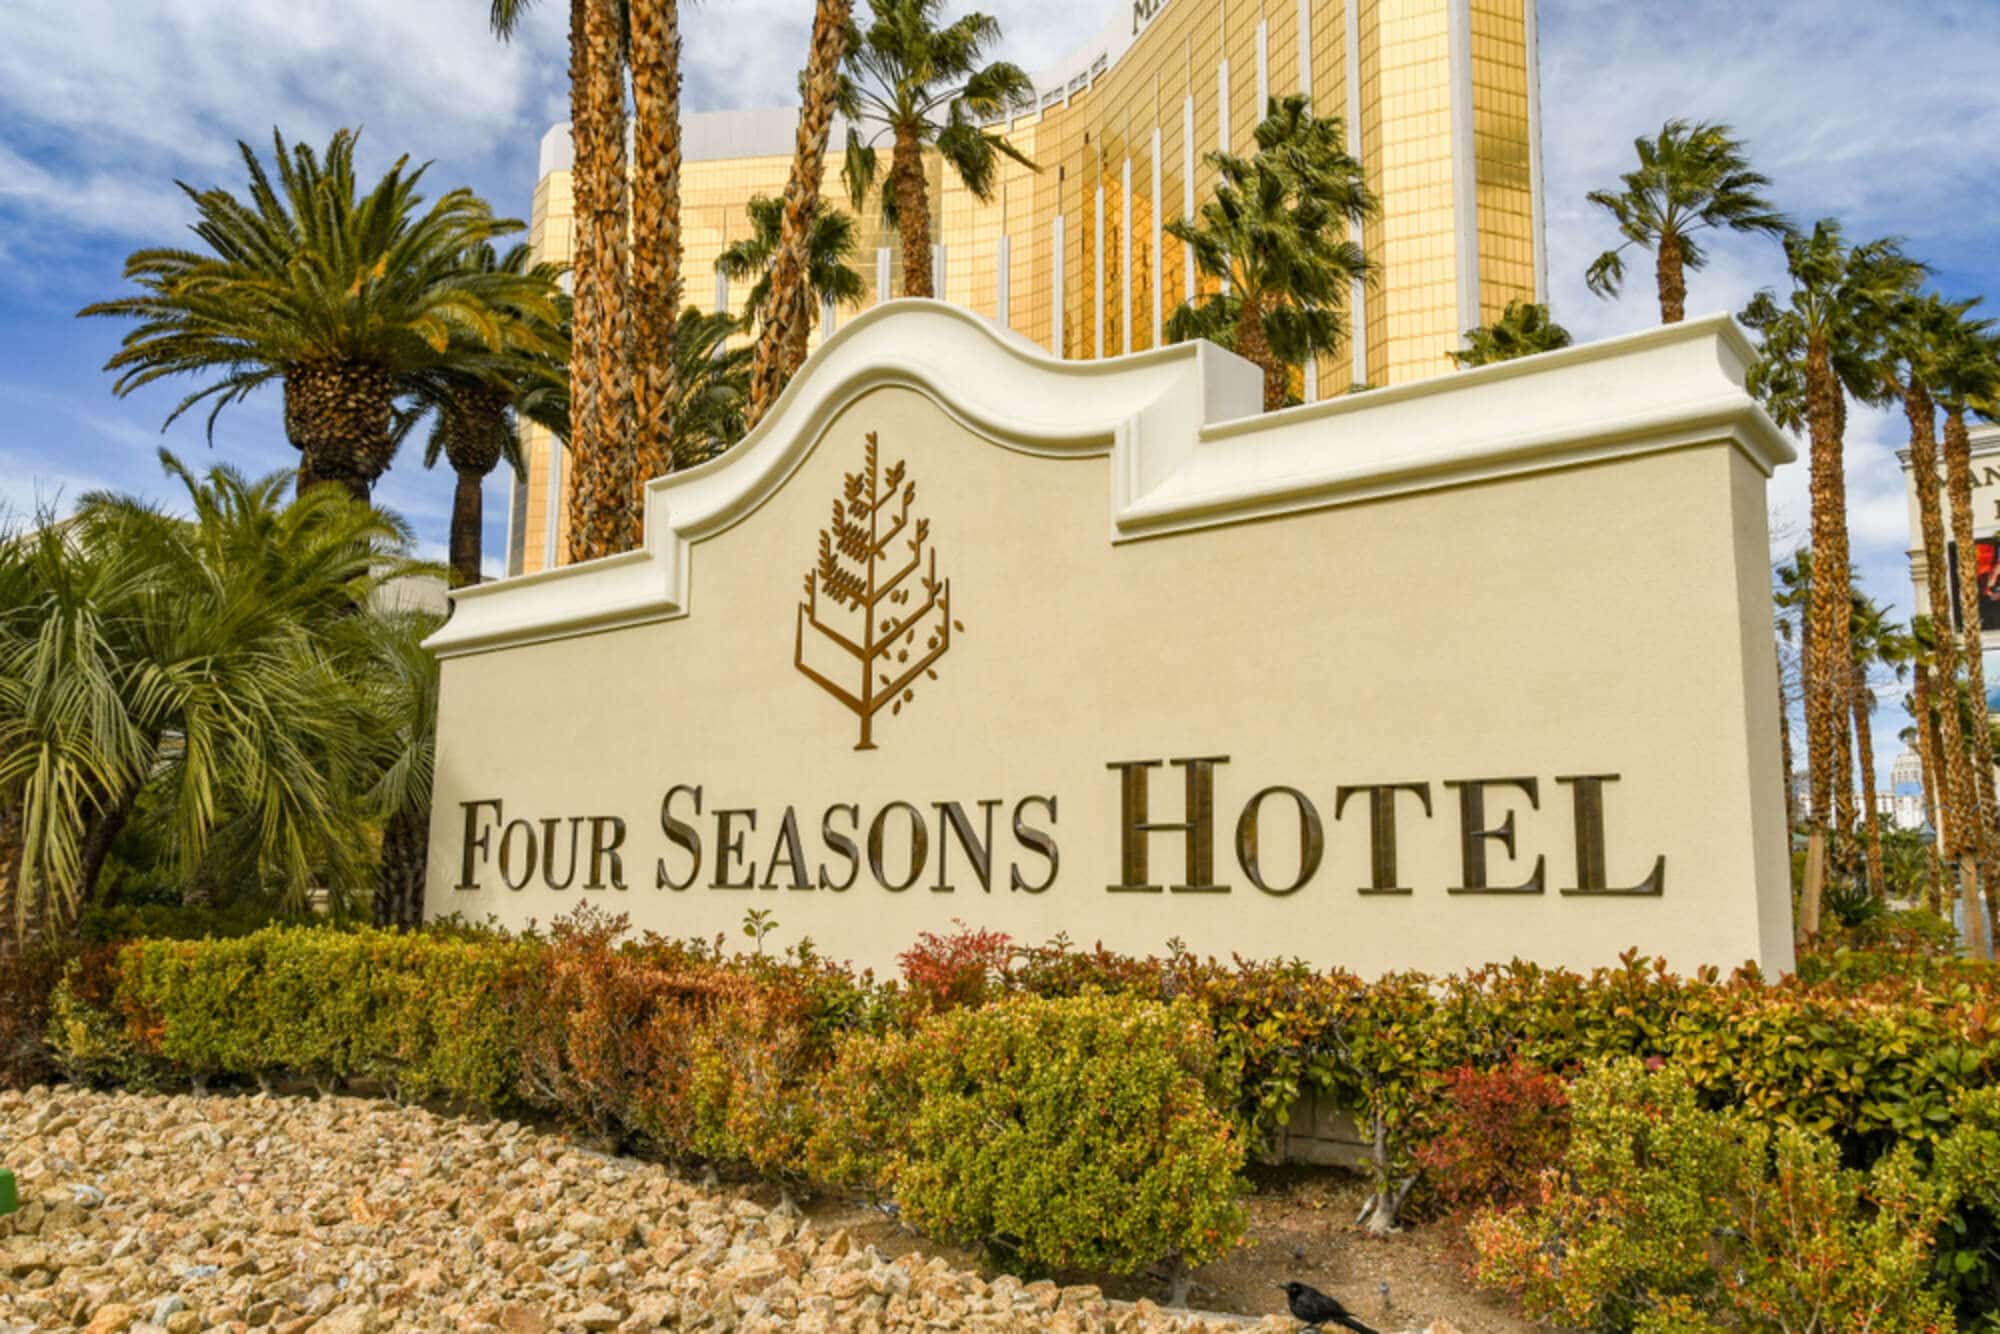 Image of the sign for the FOur Seasons Hotel in Las Vegas.